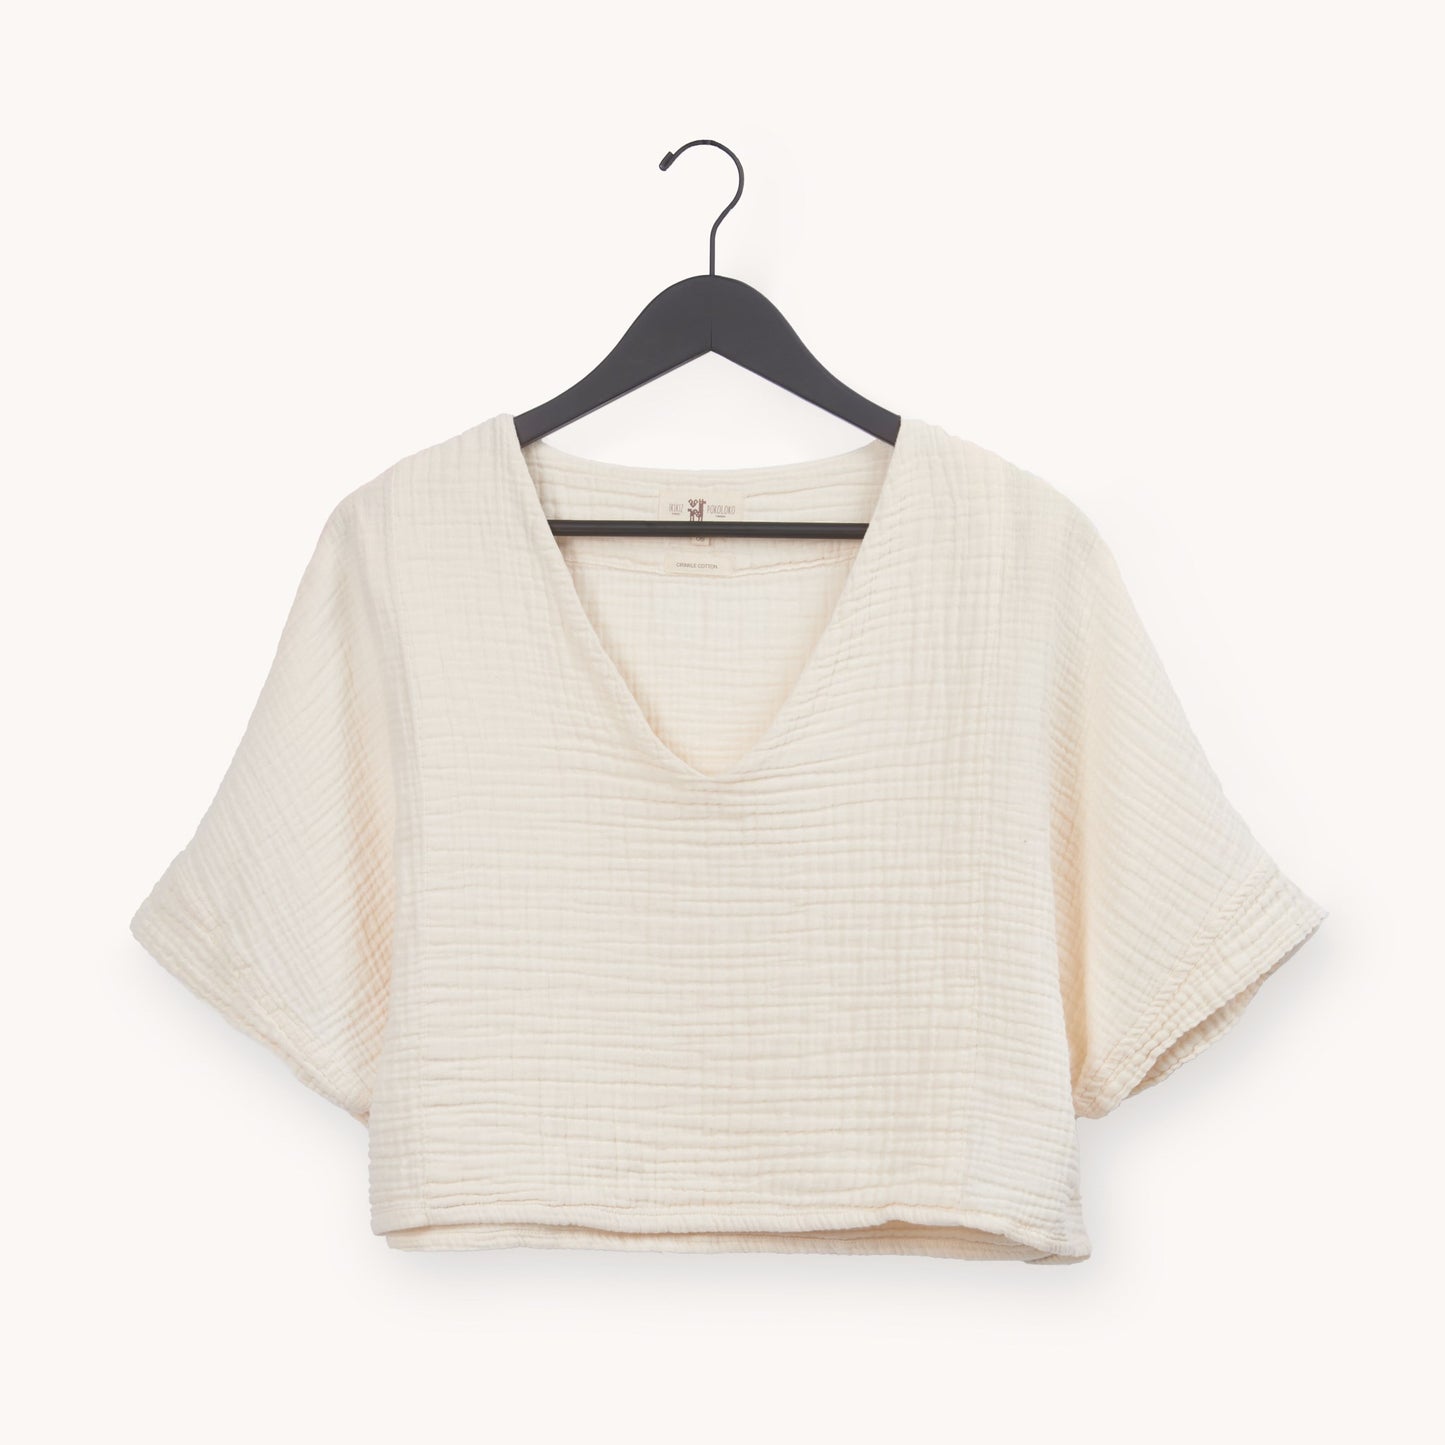 Crinkle Crop Top - One-Sized - Cream